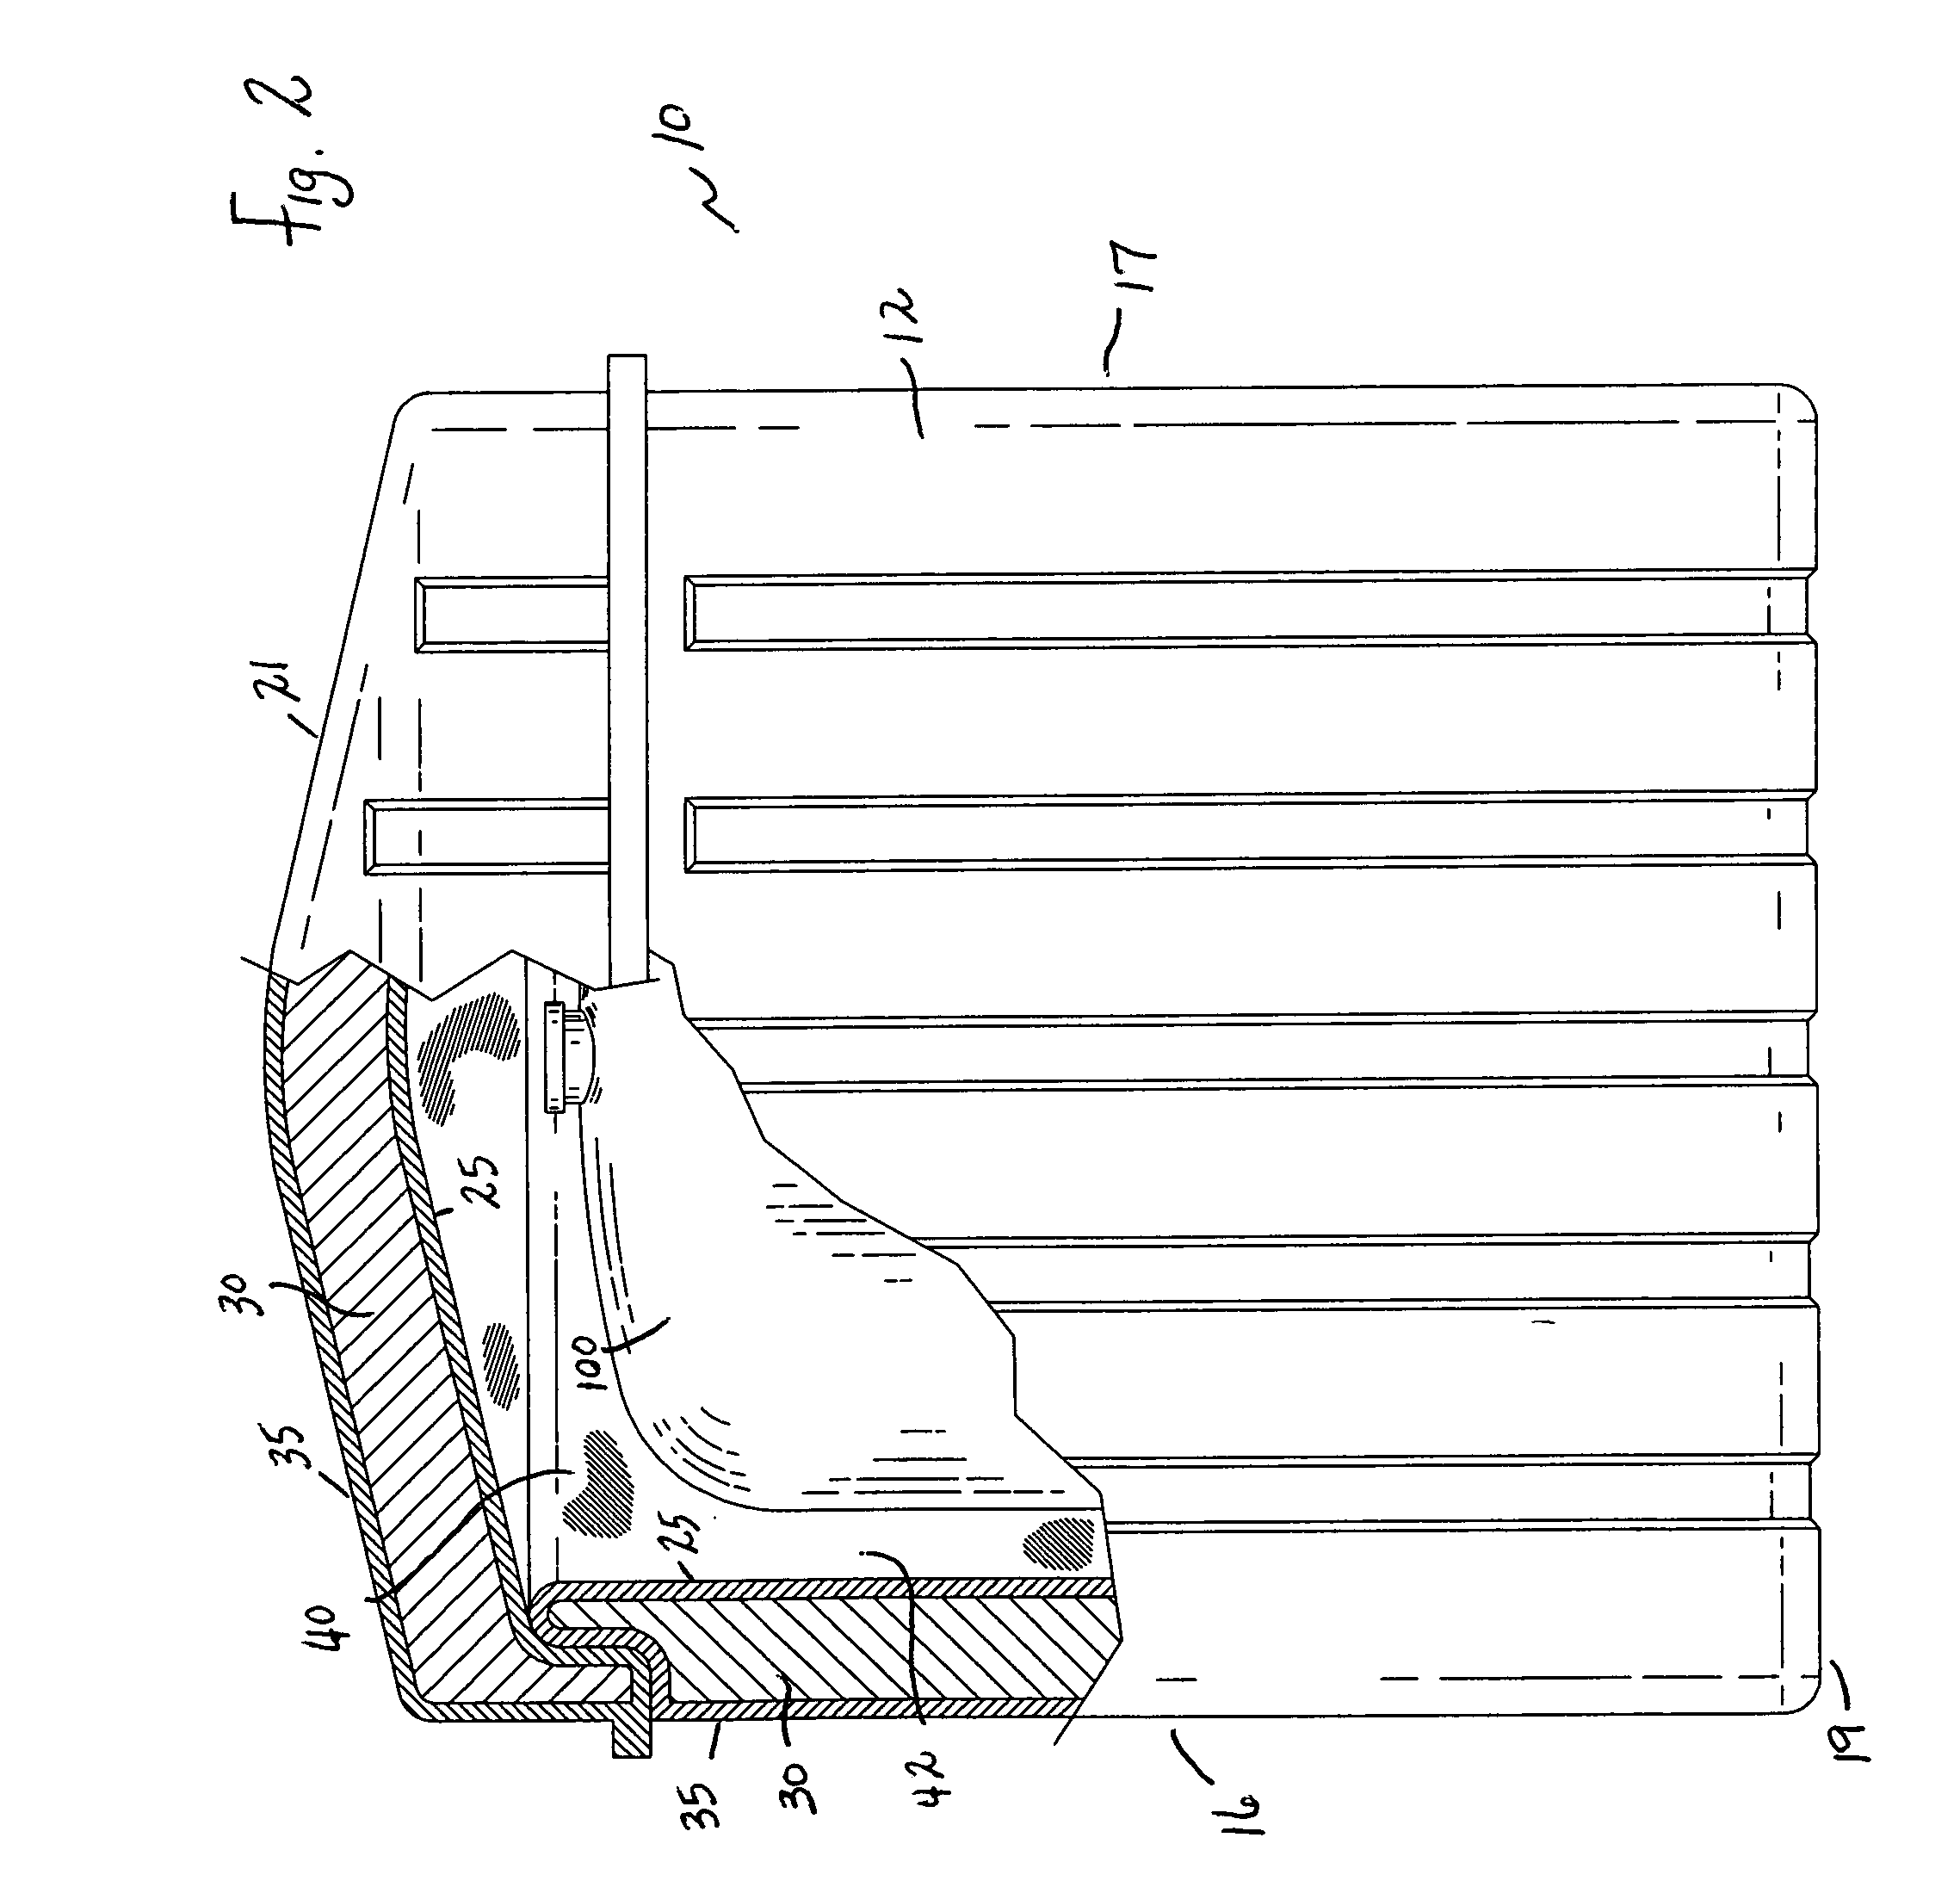 Secondary containment system for DEF storage container